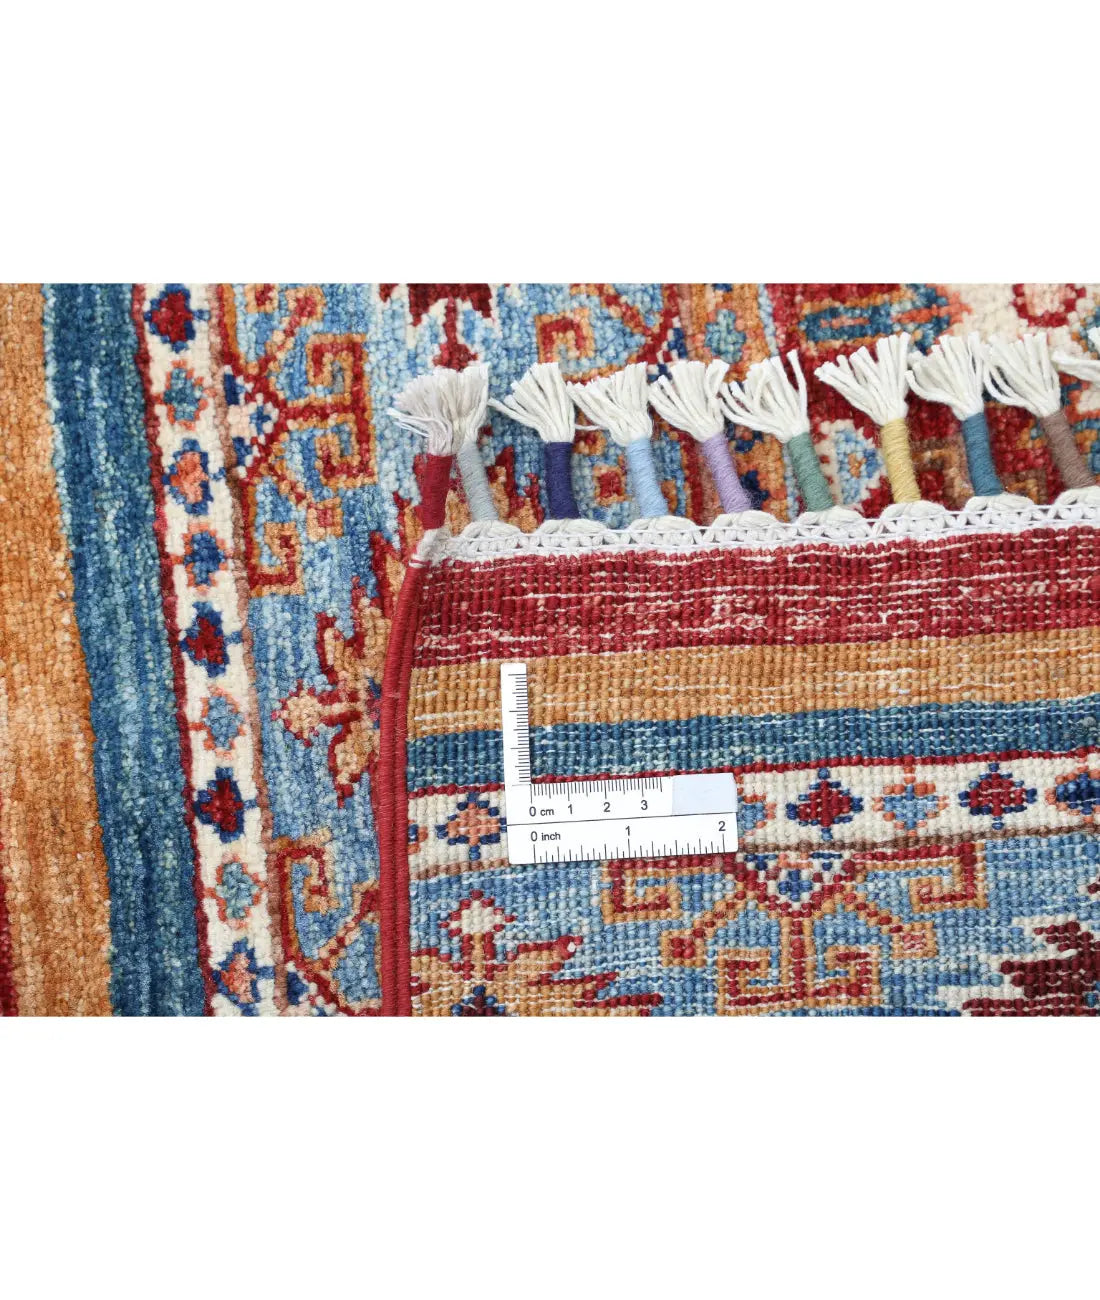 Hand Knotted Khurjeen Wool Rug - 6'8'' x 9'10''